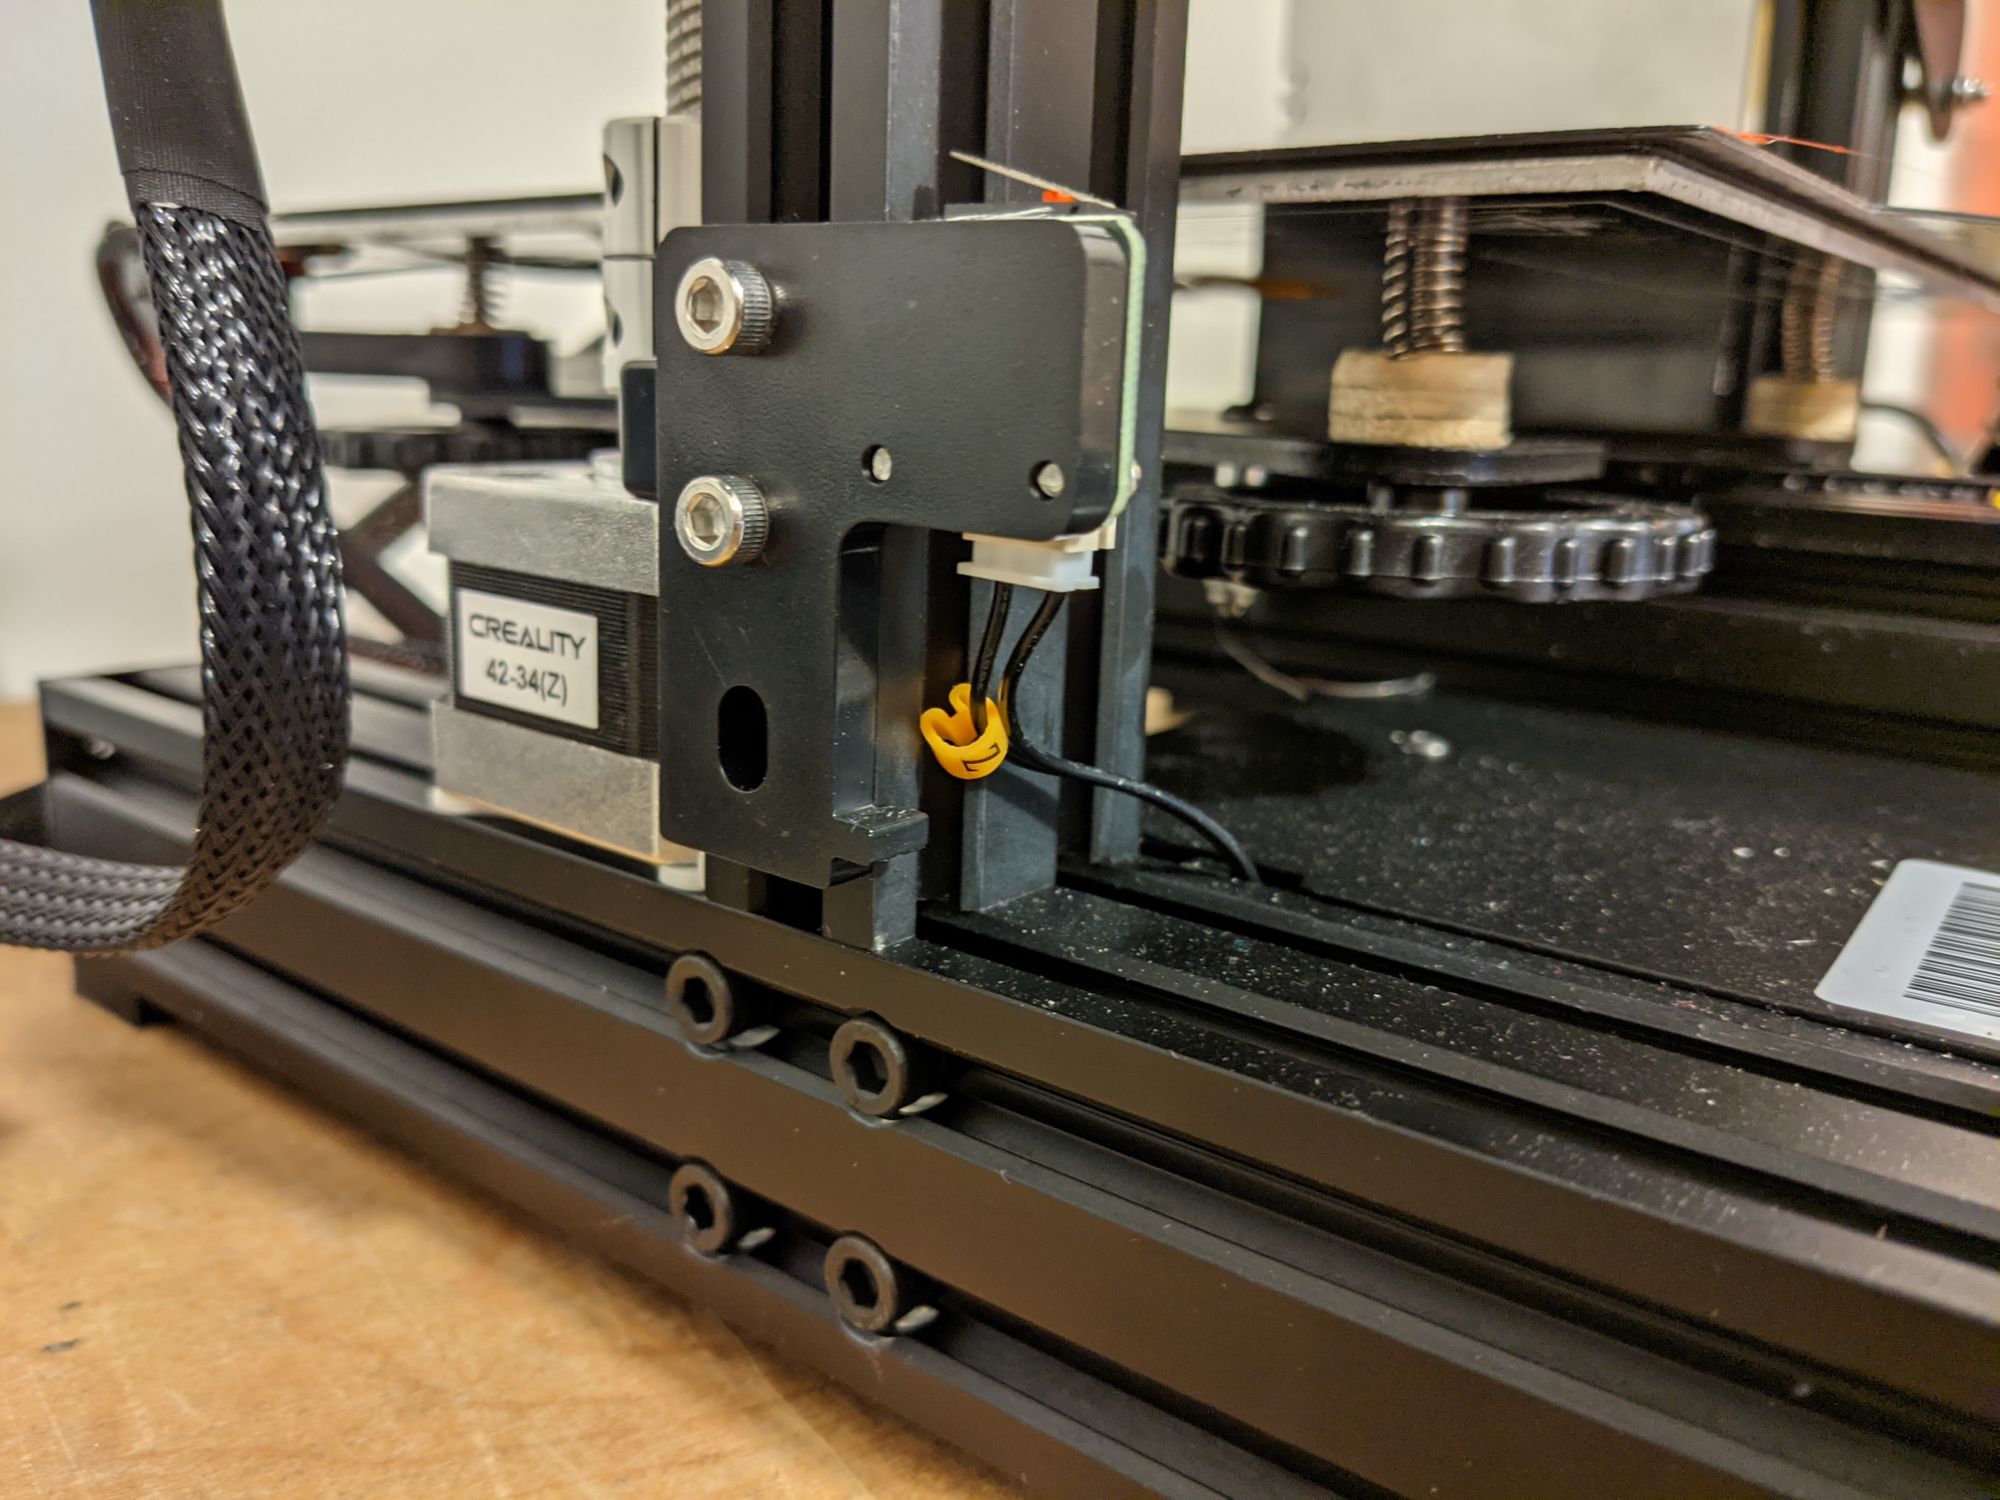 What the manual doesn't tell you - Ender 3 Pro initial setup